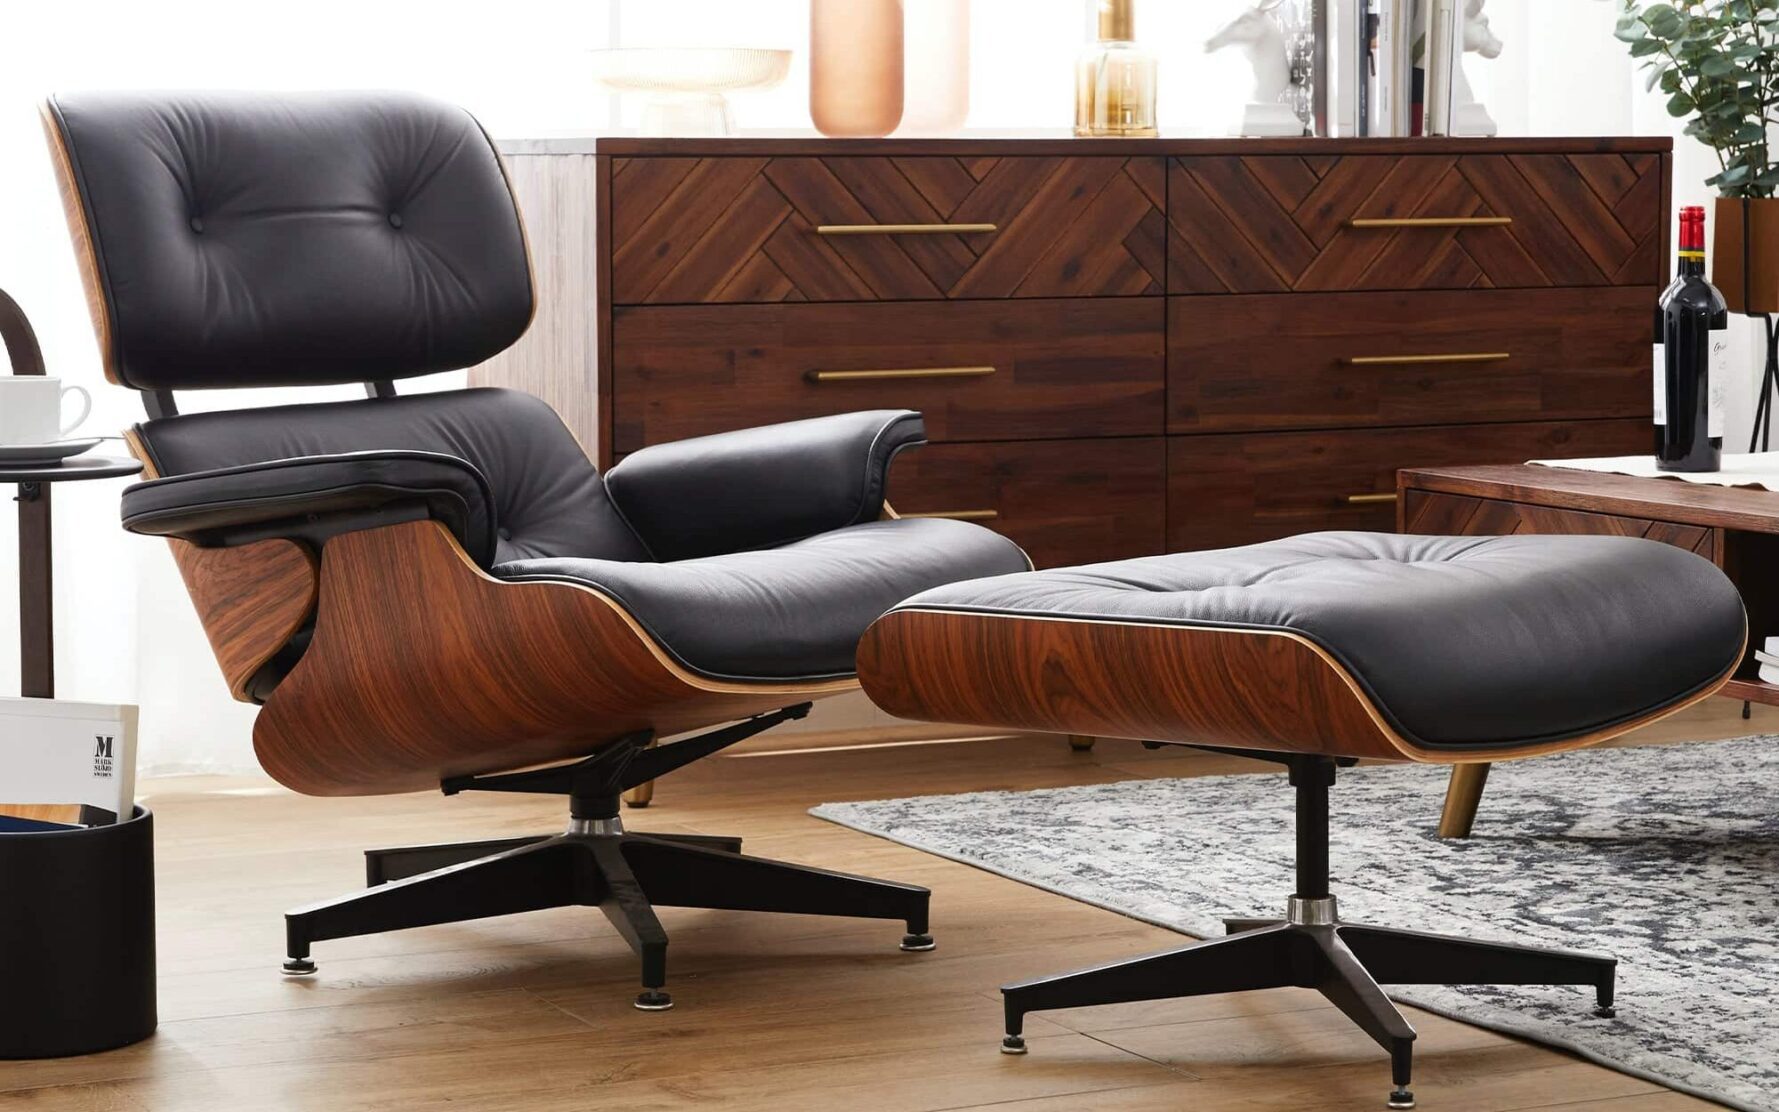 ClassicLoungeChair BlackPalisander 1 edited scaled